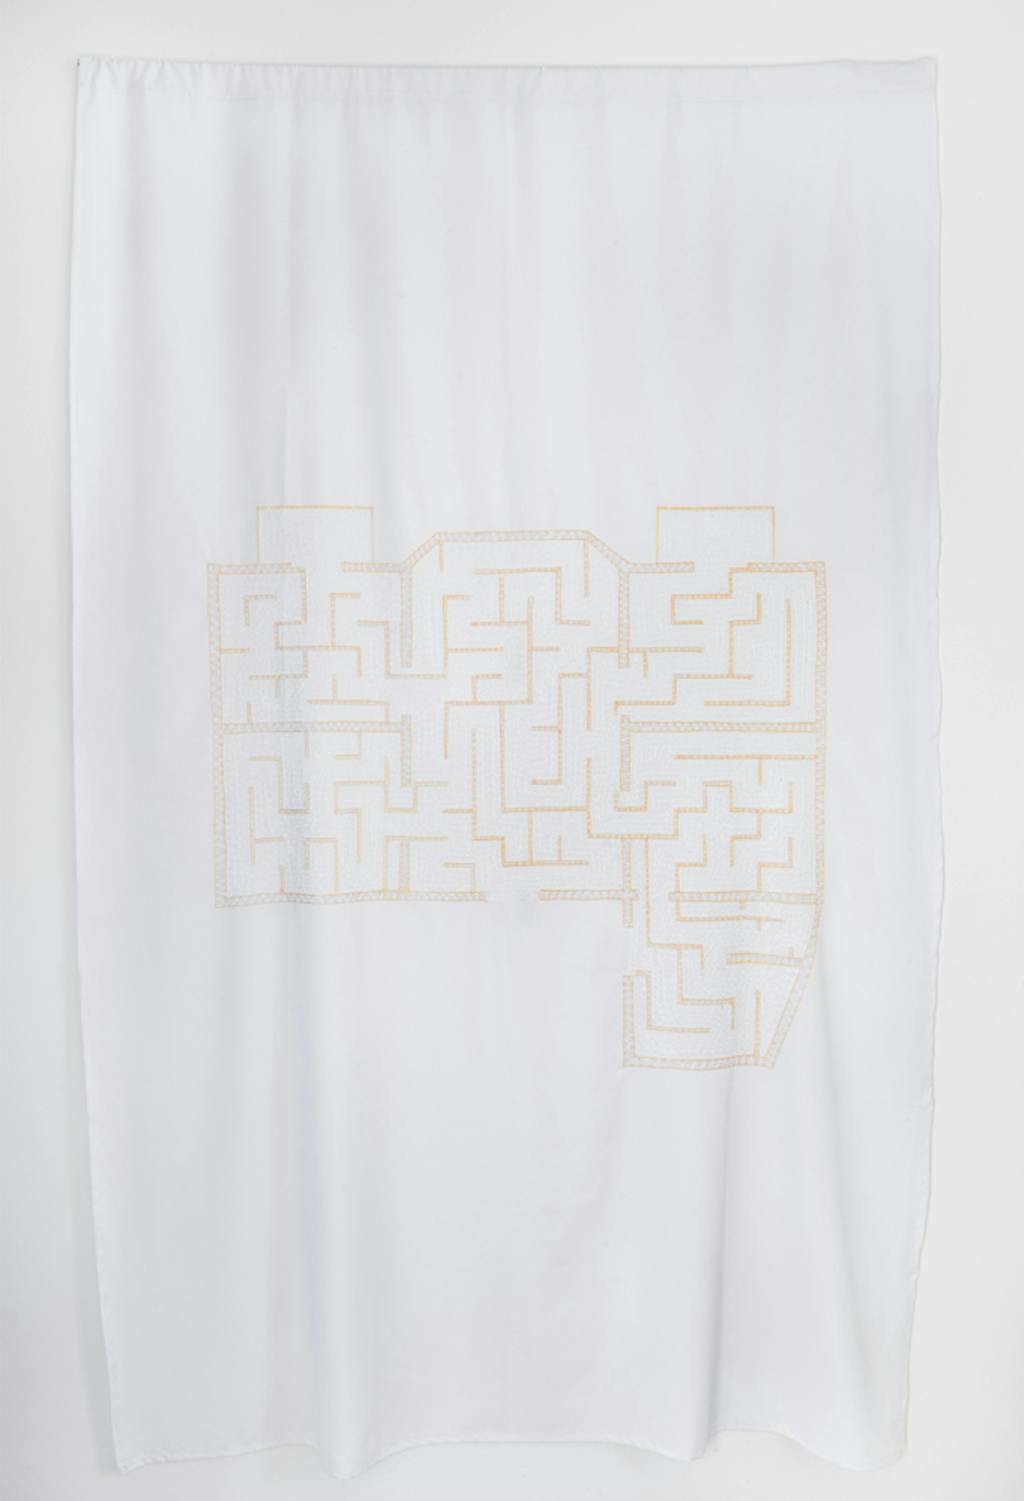 <p style="font-size:10px">Stéphanie Saadé, We’ve Been Swallowed by Our Houses, 2020, Aghabani embroidery on cotton cloth, 240 X 140 cm, Variation 2/3 </p>

<p style="font-size:10px">During lockdown, the artist measured her apartment in Lebanon and drew a map of it, which she then turned into a navigable labyrinth. It is embroidered using a traditional technique composed of chain-stitches and spiral patterns.</p> - © Image courtesy of the artist and Grey Noise, Dubai, Paris Internationale